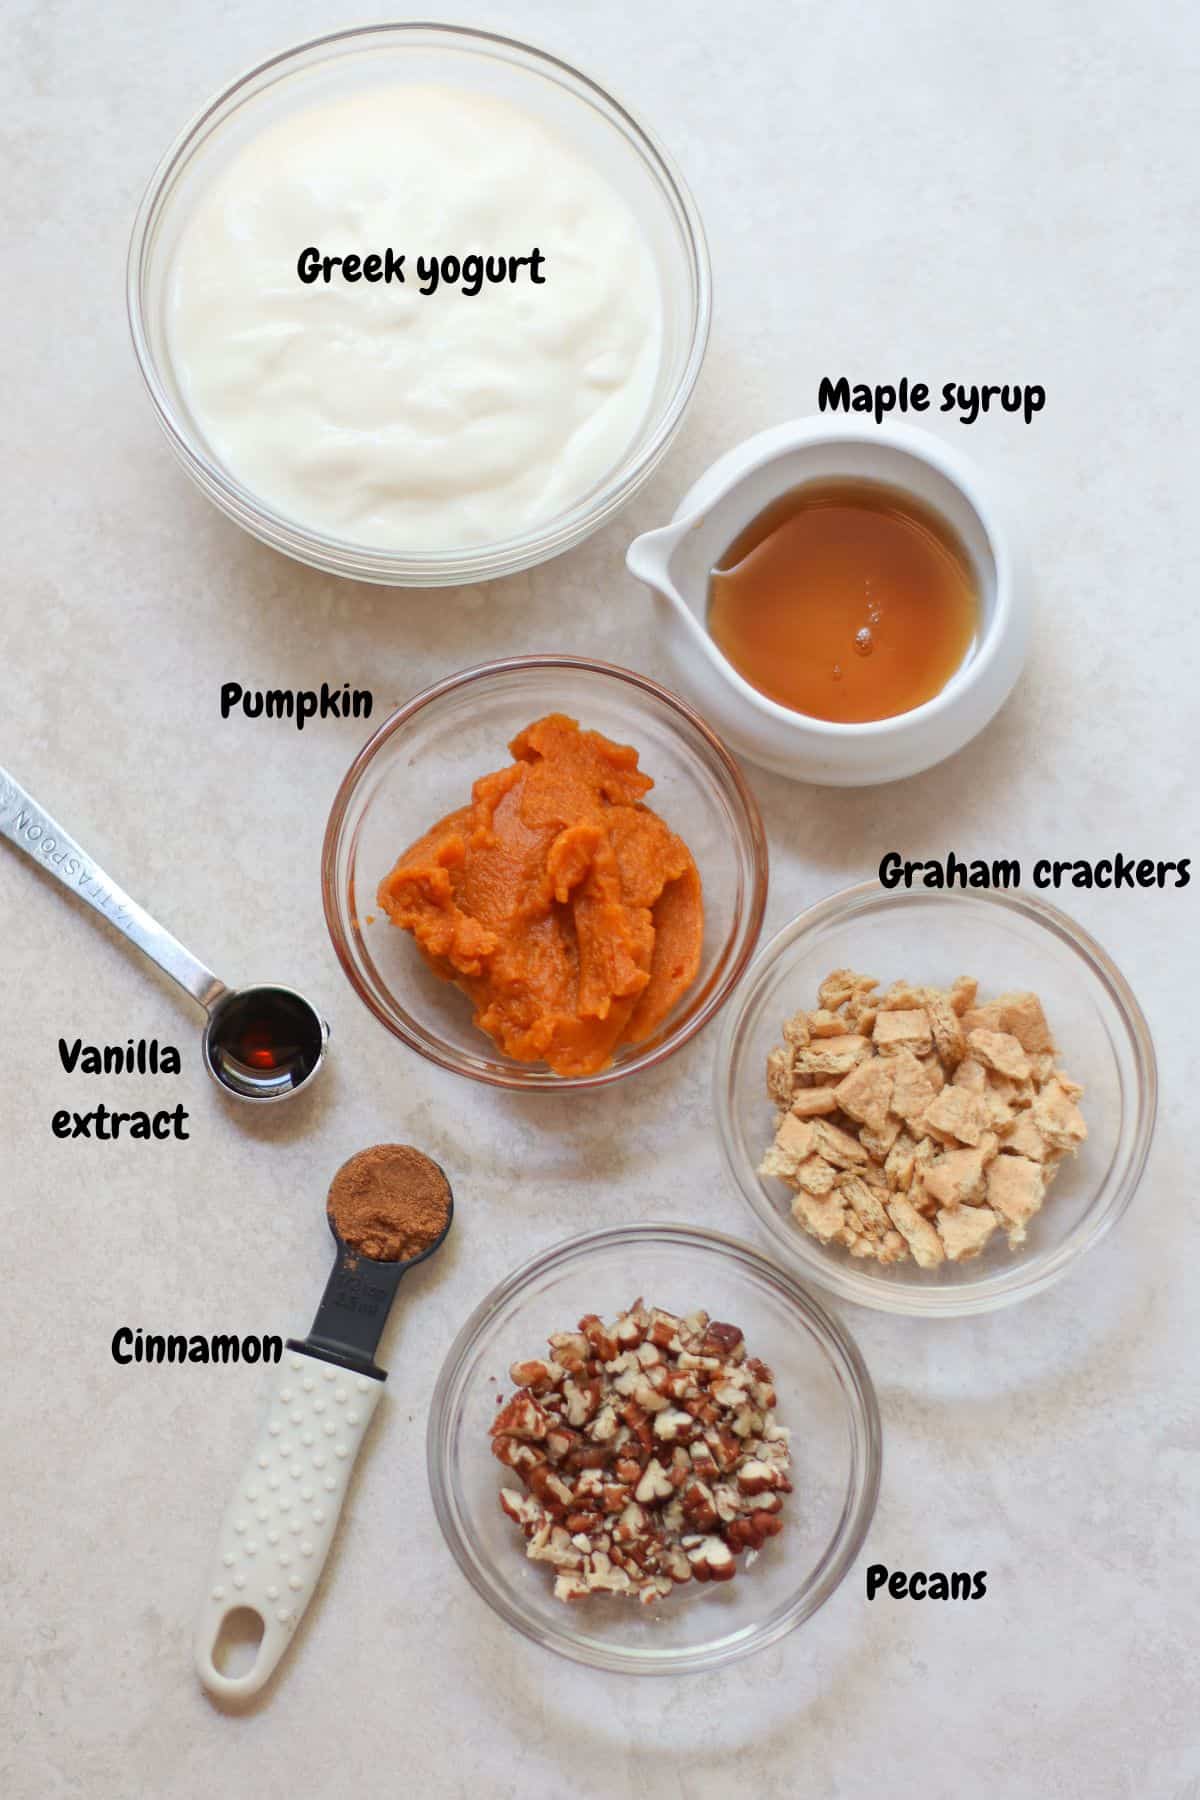 All the ingredients laid out on a white background and labeled.